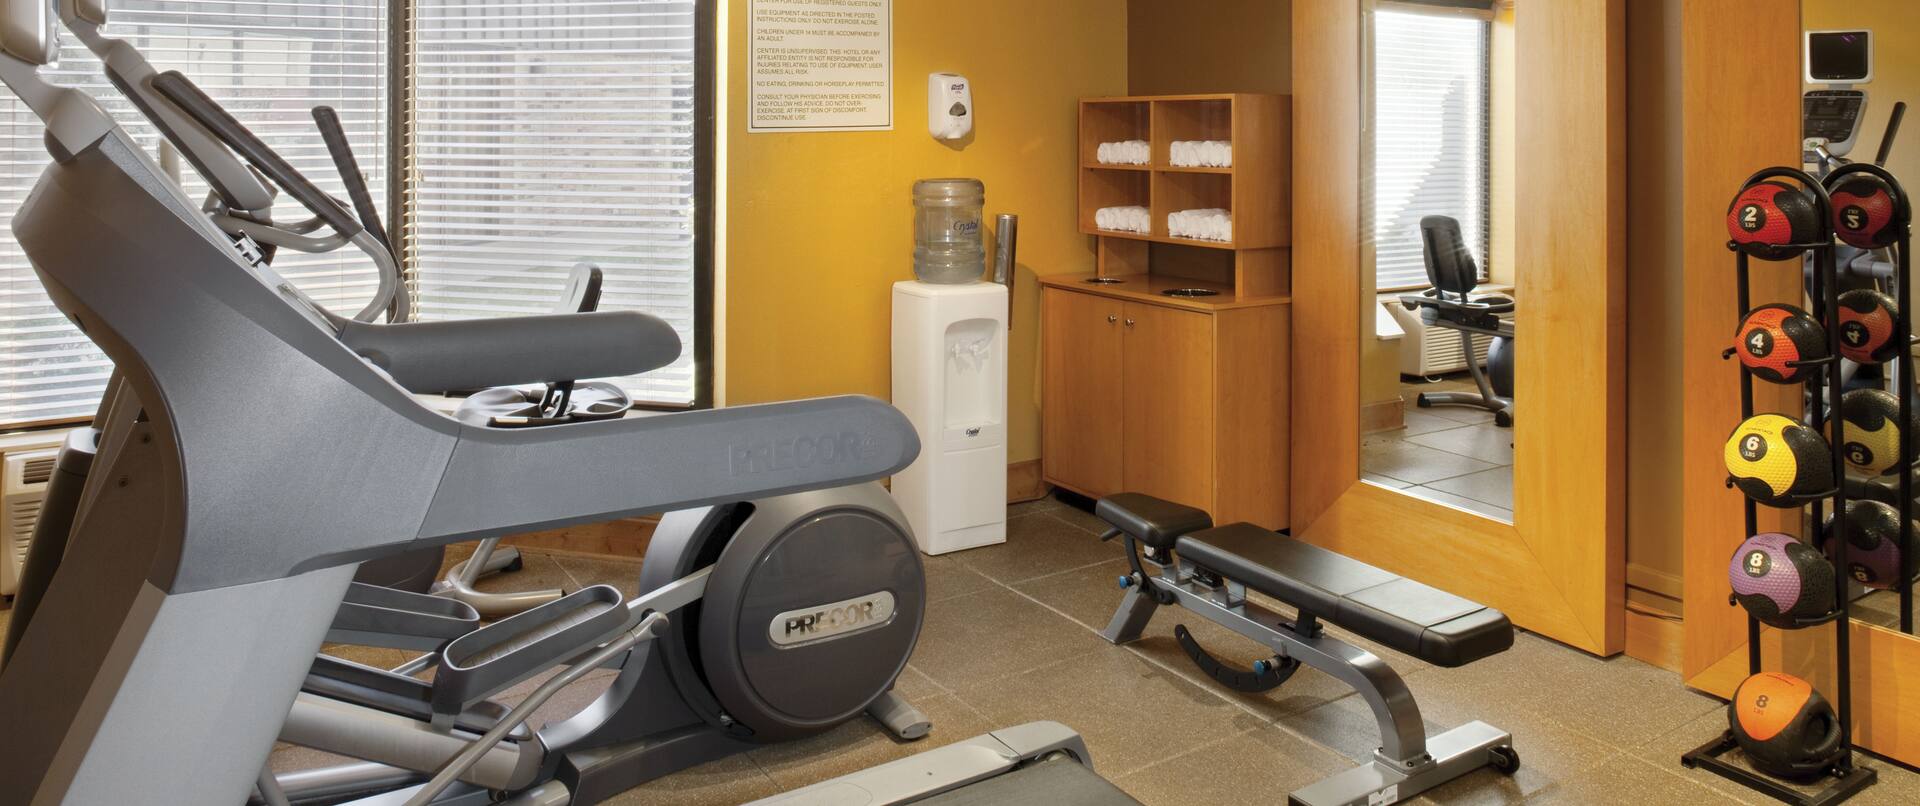 Fitness Center with Treadmill, Cross-Trainer and Weight Bench